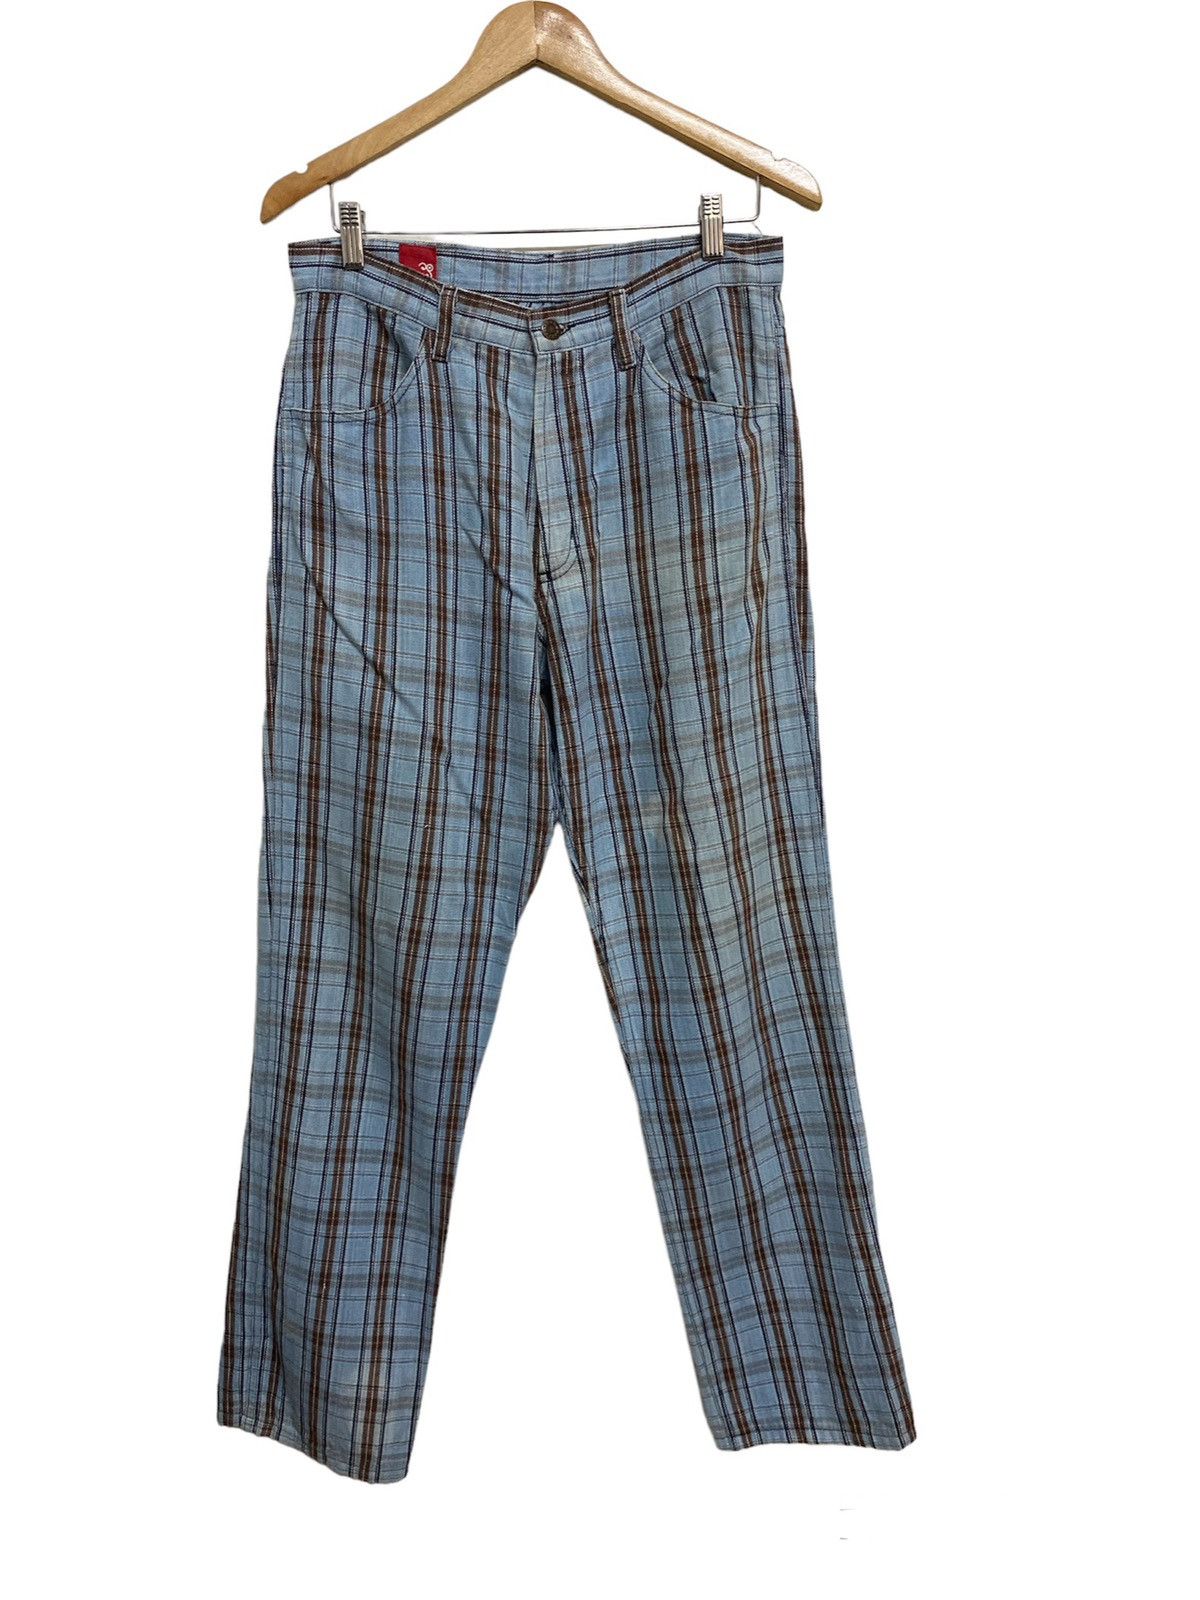 Nepenthes New York - Nepenthes Checkered Jeans - 1